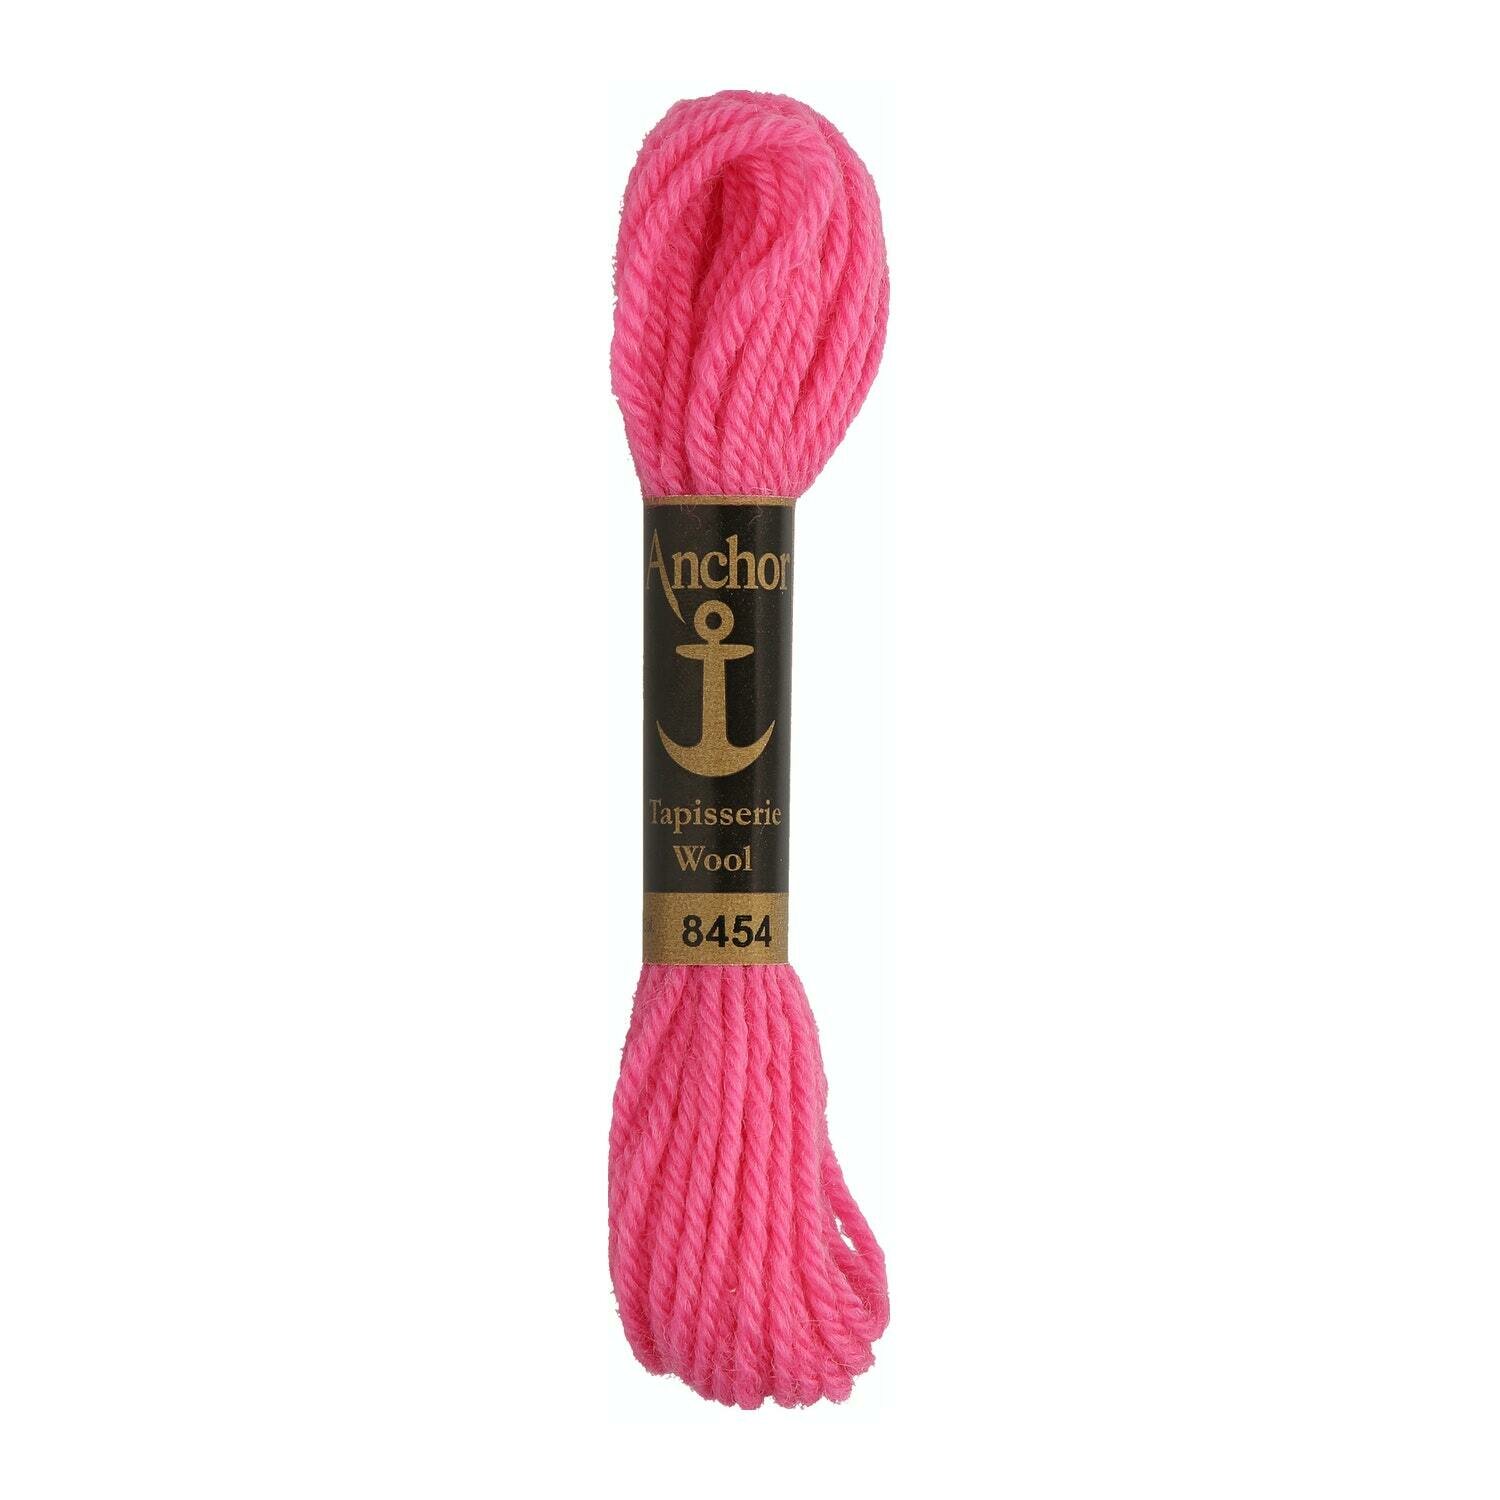 Anchor Tapisserie Wool # 08454